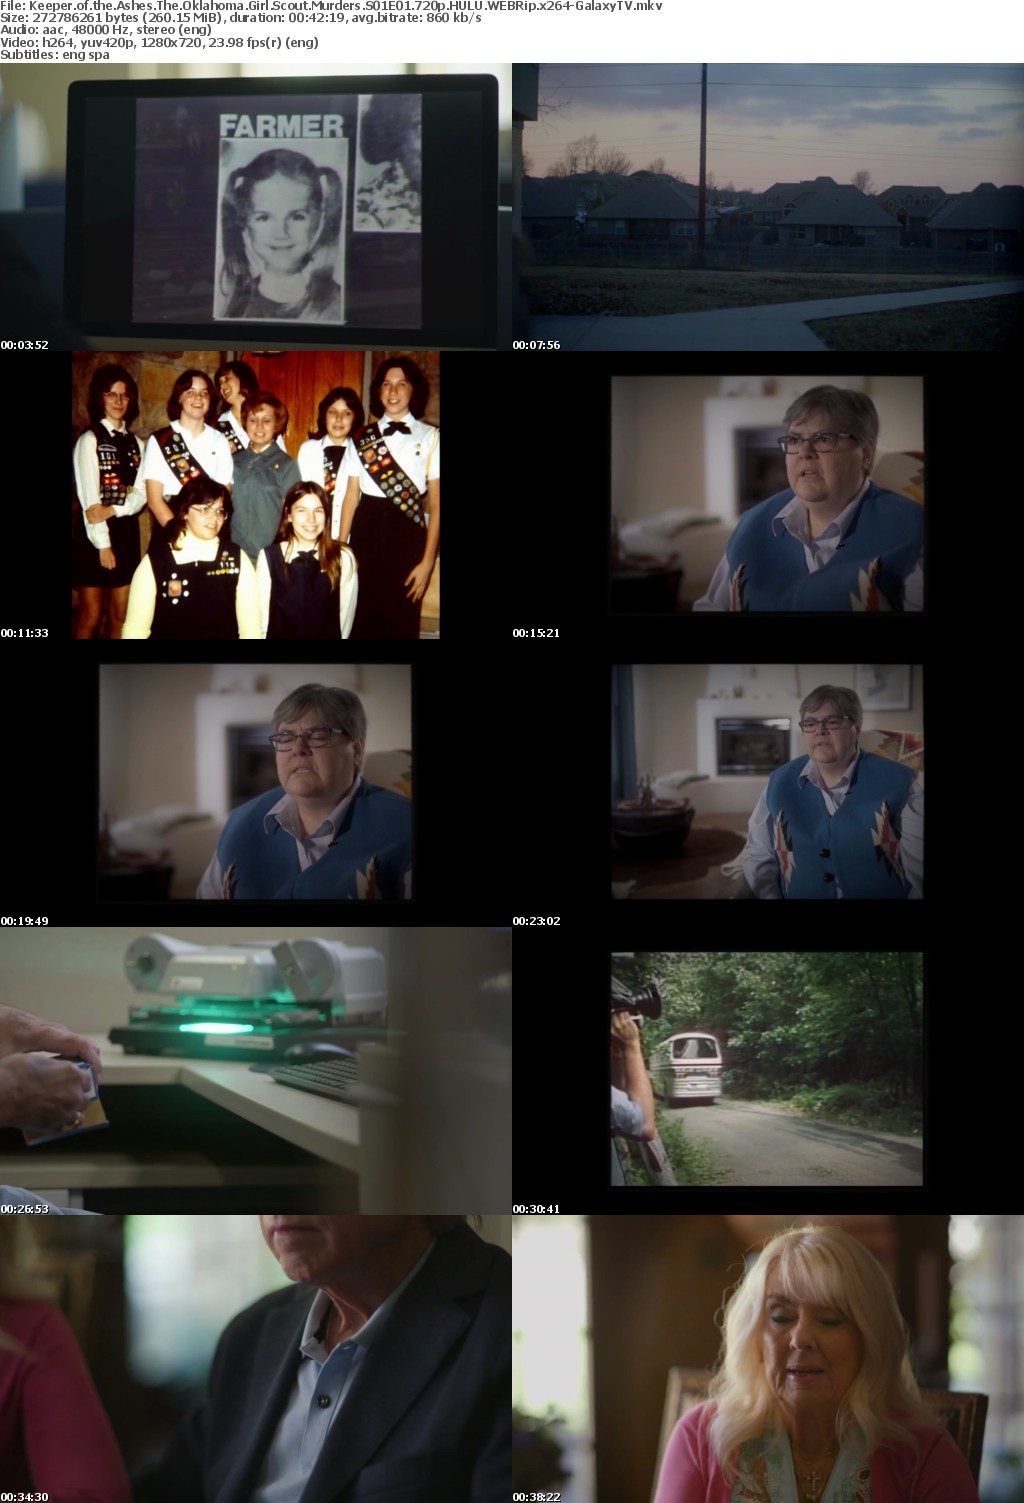 Keeper of the Ashes The Oklahoma Girl Scout Murders S01 COMPLETE 720p HULU WEBRip x264-GalaxyTV